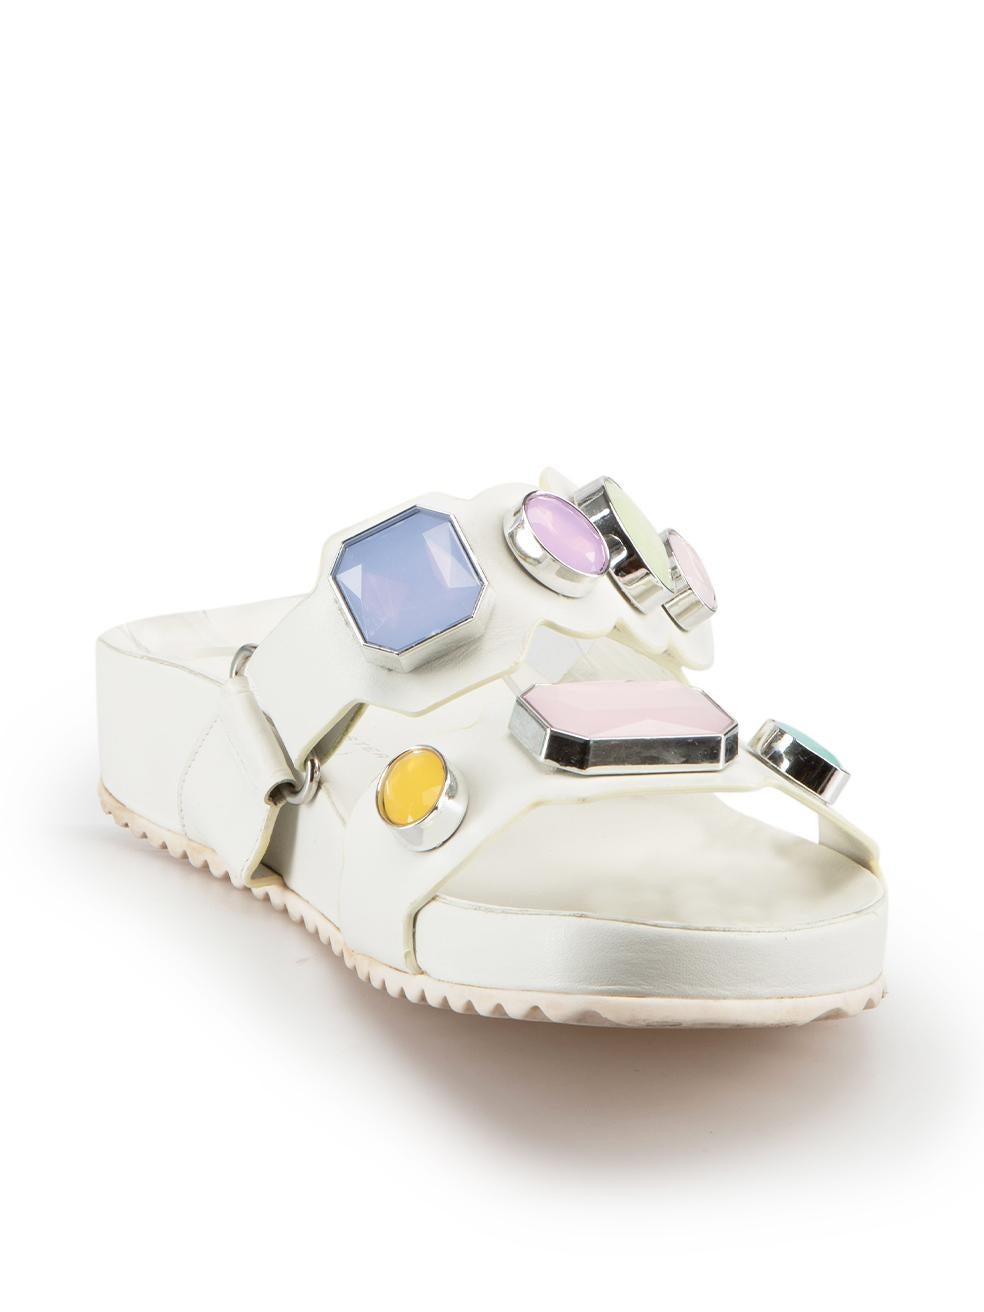 CONDITION is Good. Minor wear to shoes is evident. Light wear to both shoe straps and soles with light marks and abrasions on this used Sophia Webster designer resale item.
 
Details
White
Leather
Slides
Open toe
Multicolour jewel